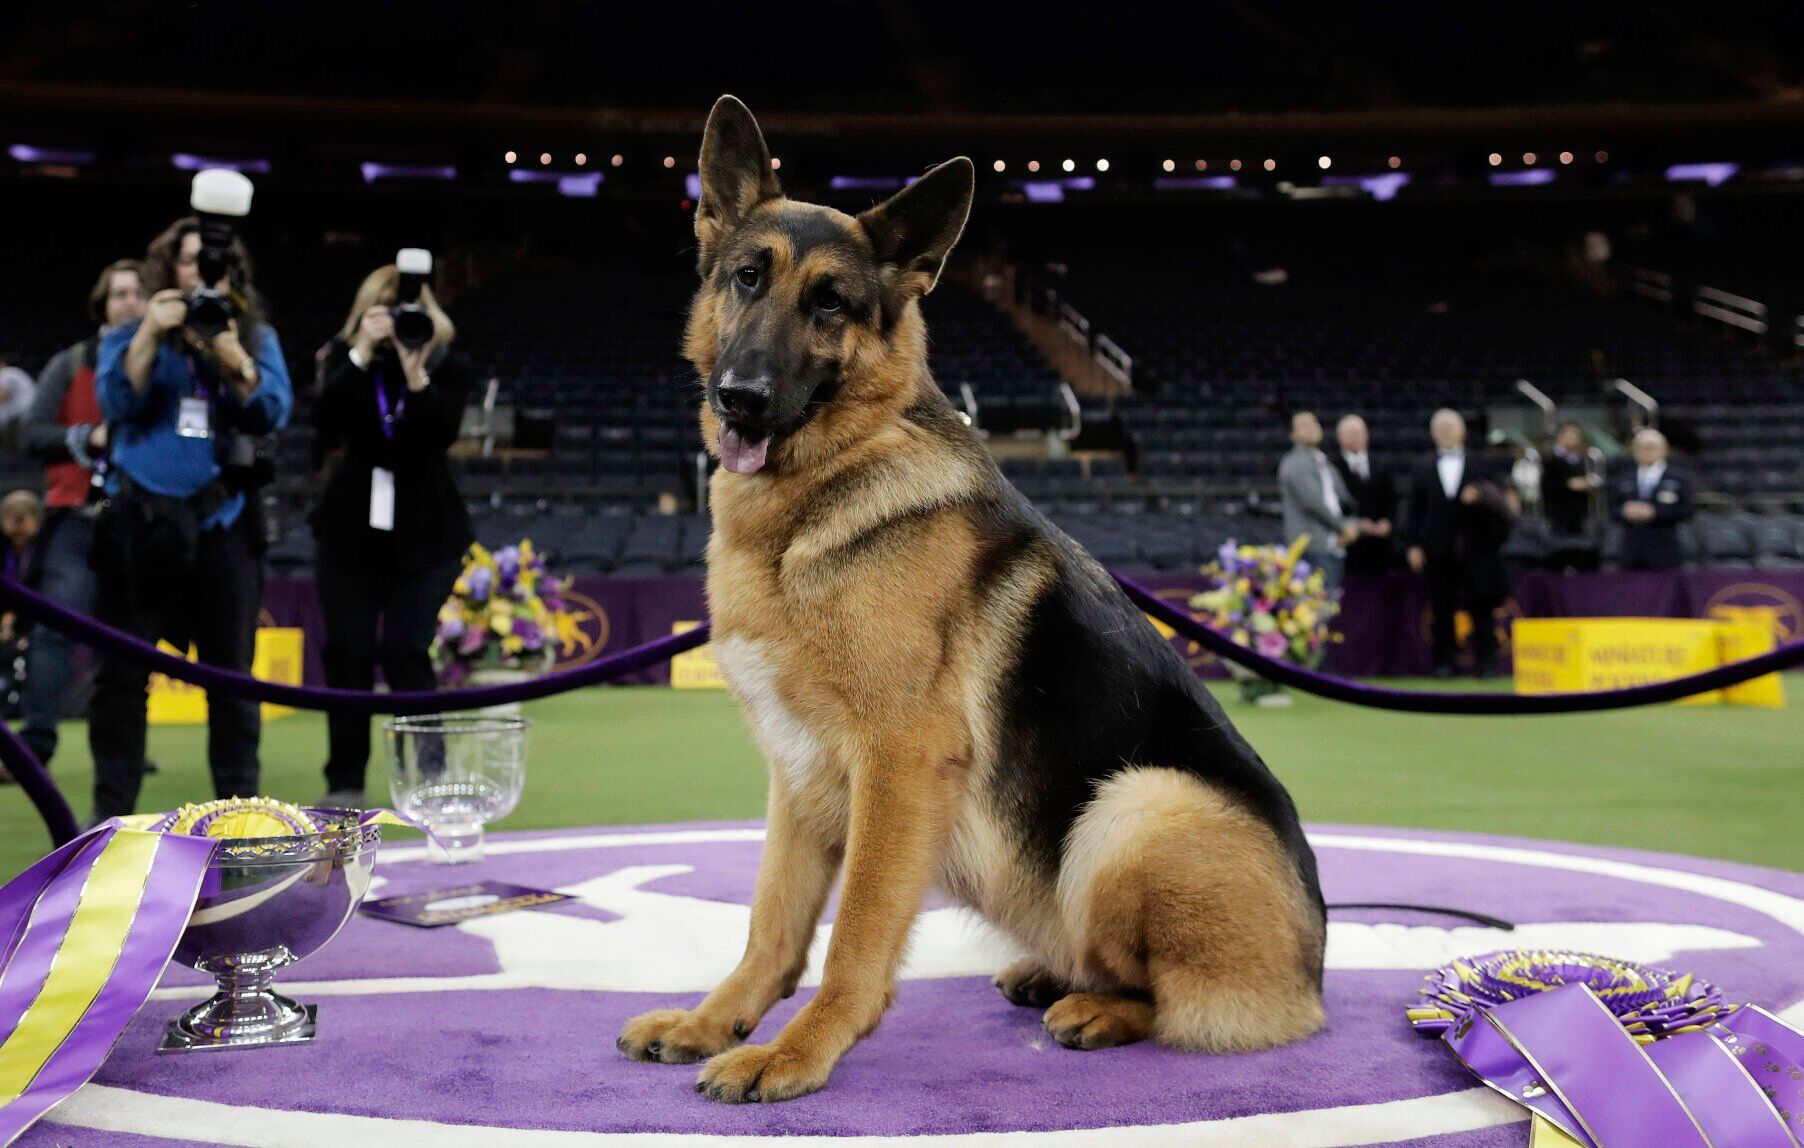 Rumor only 2nd German shepherd to ever win Best in Show at Westminster